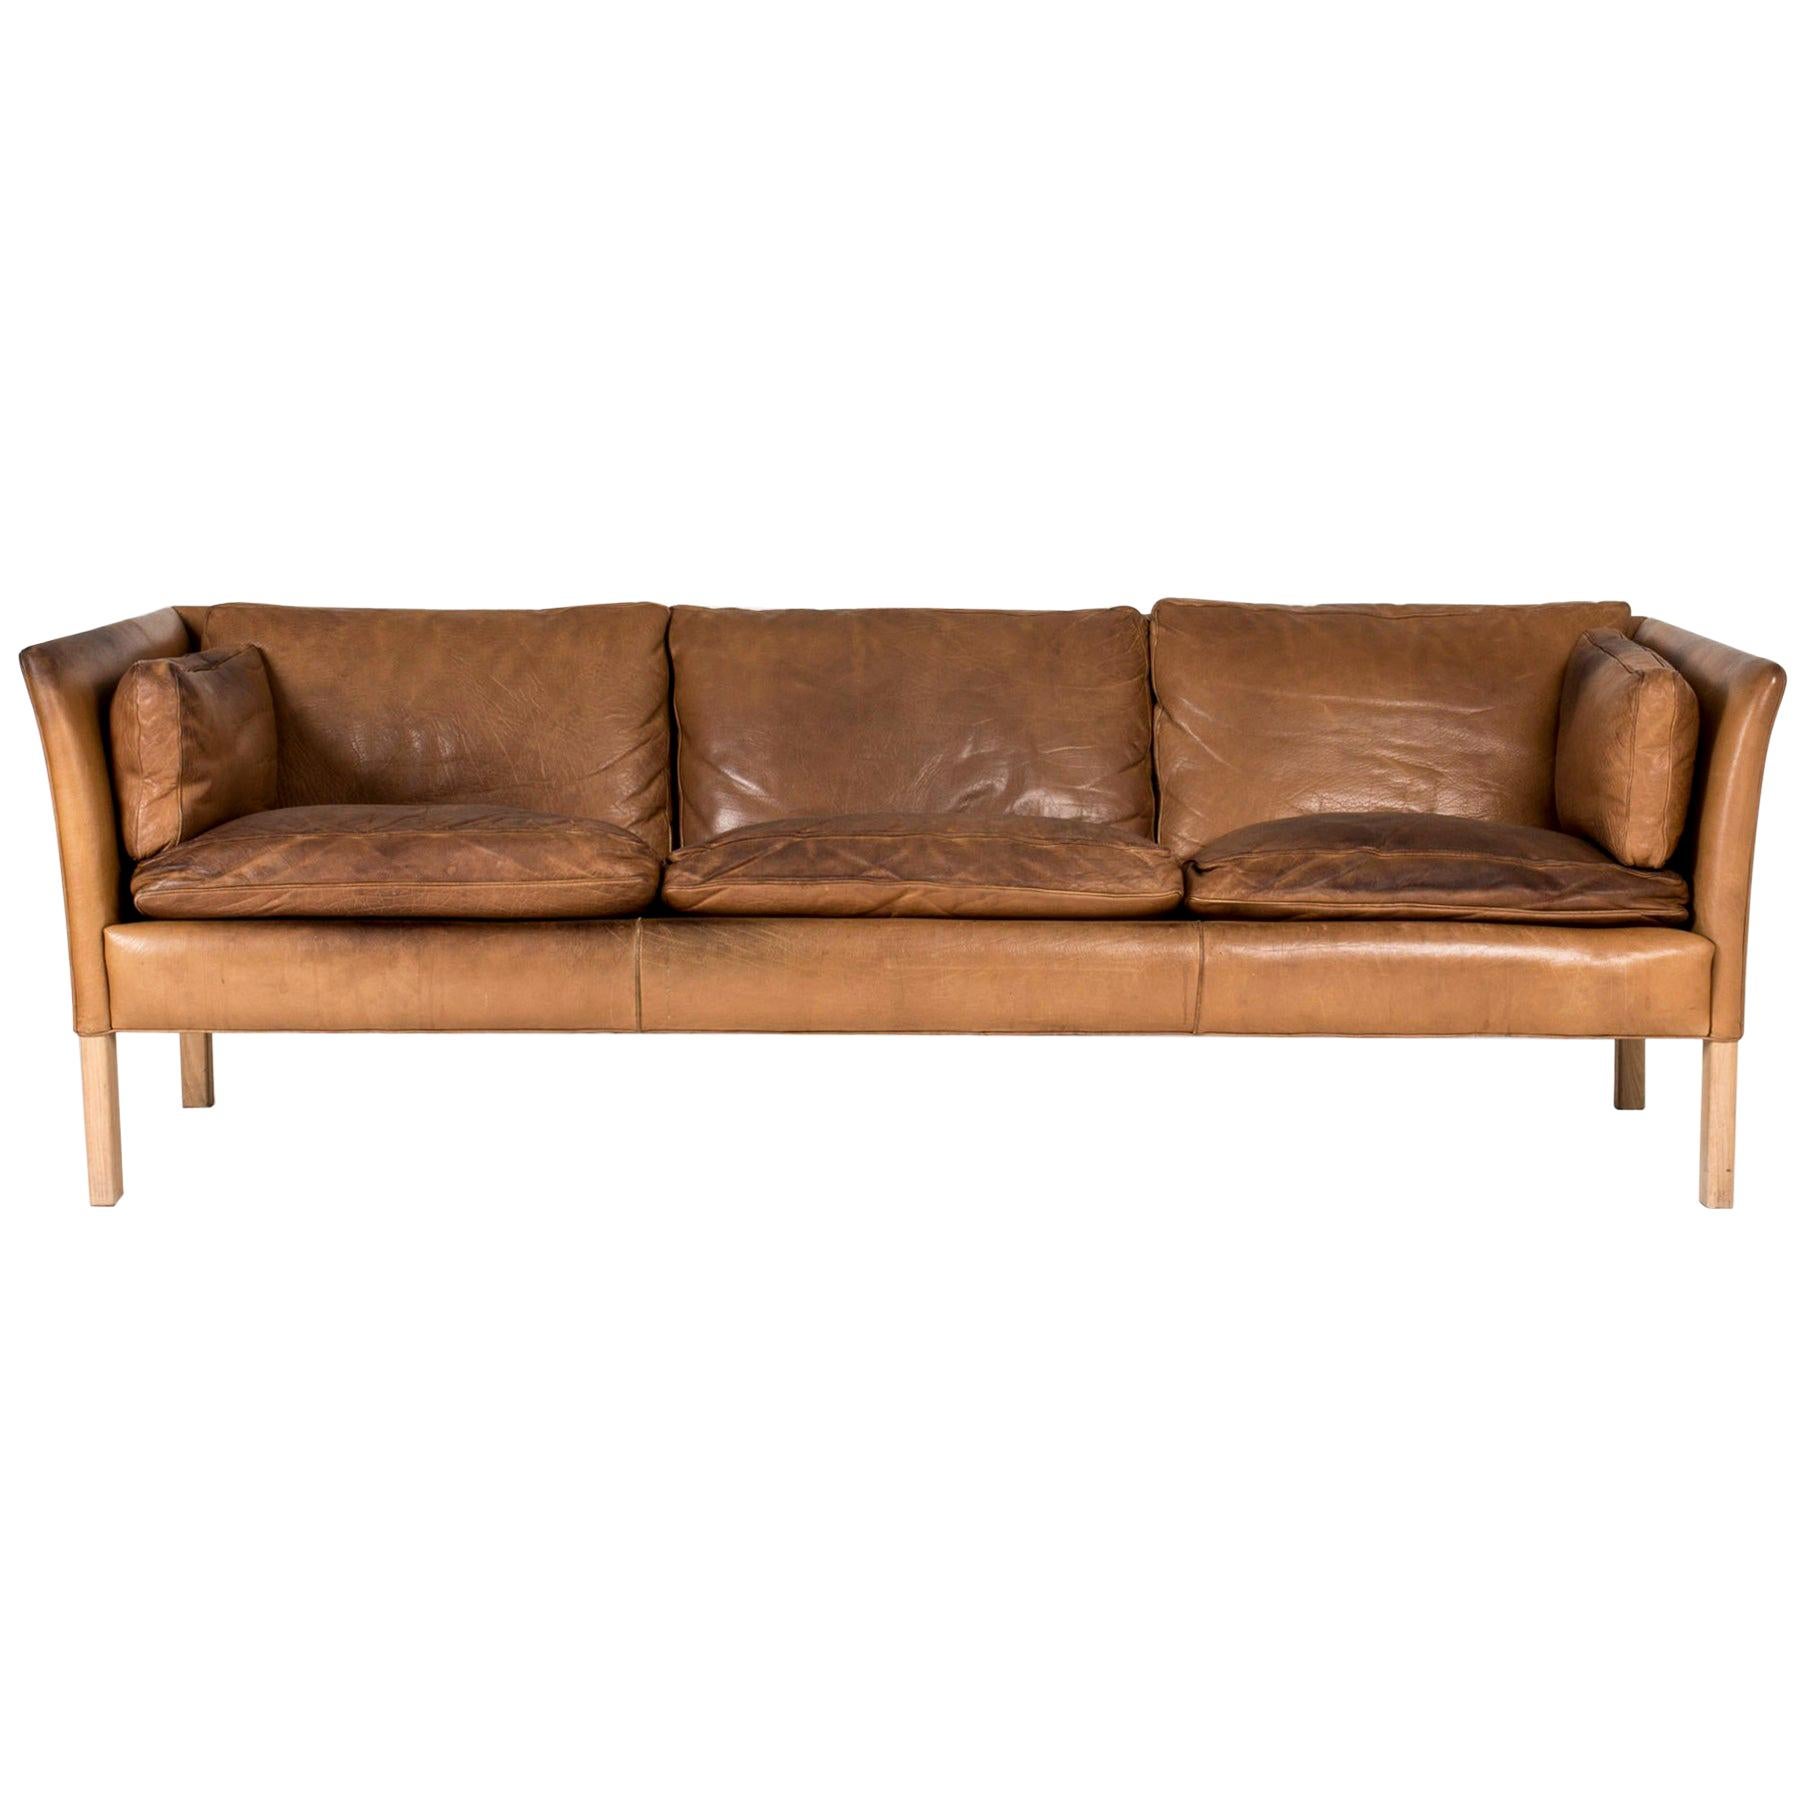 "Cromwell" Sofa by Arne Norell